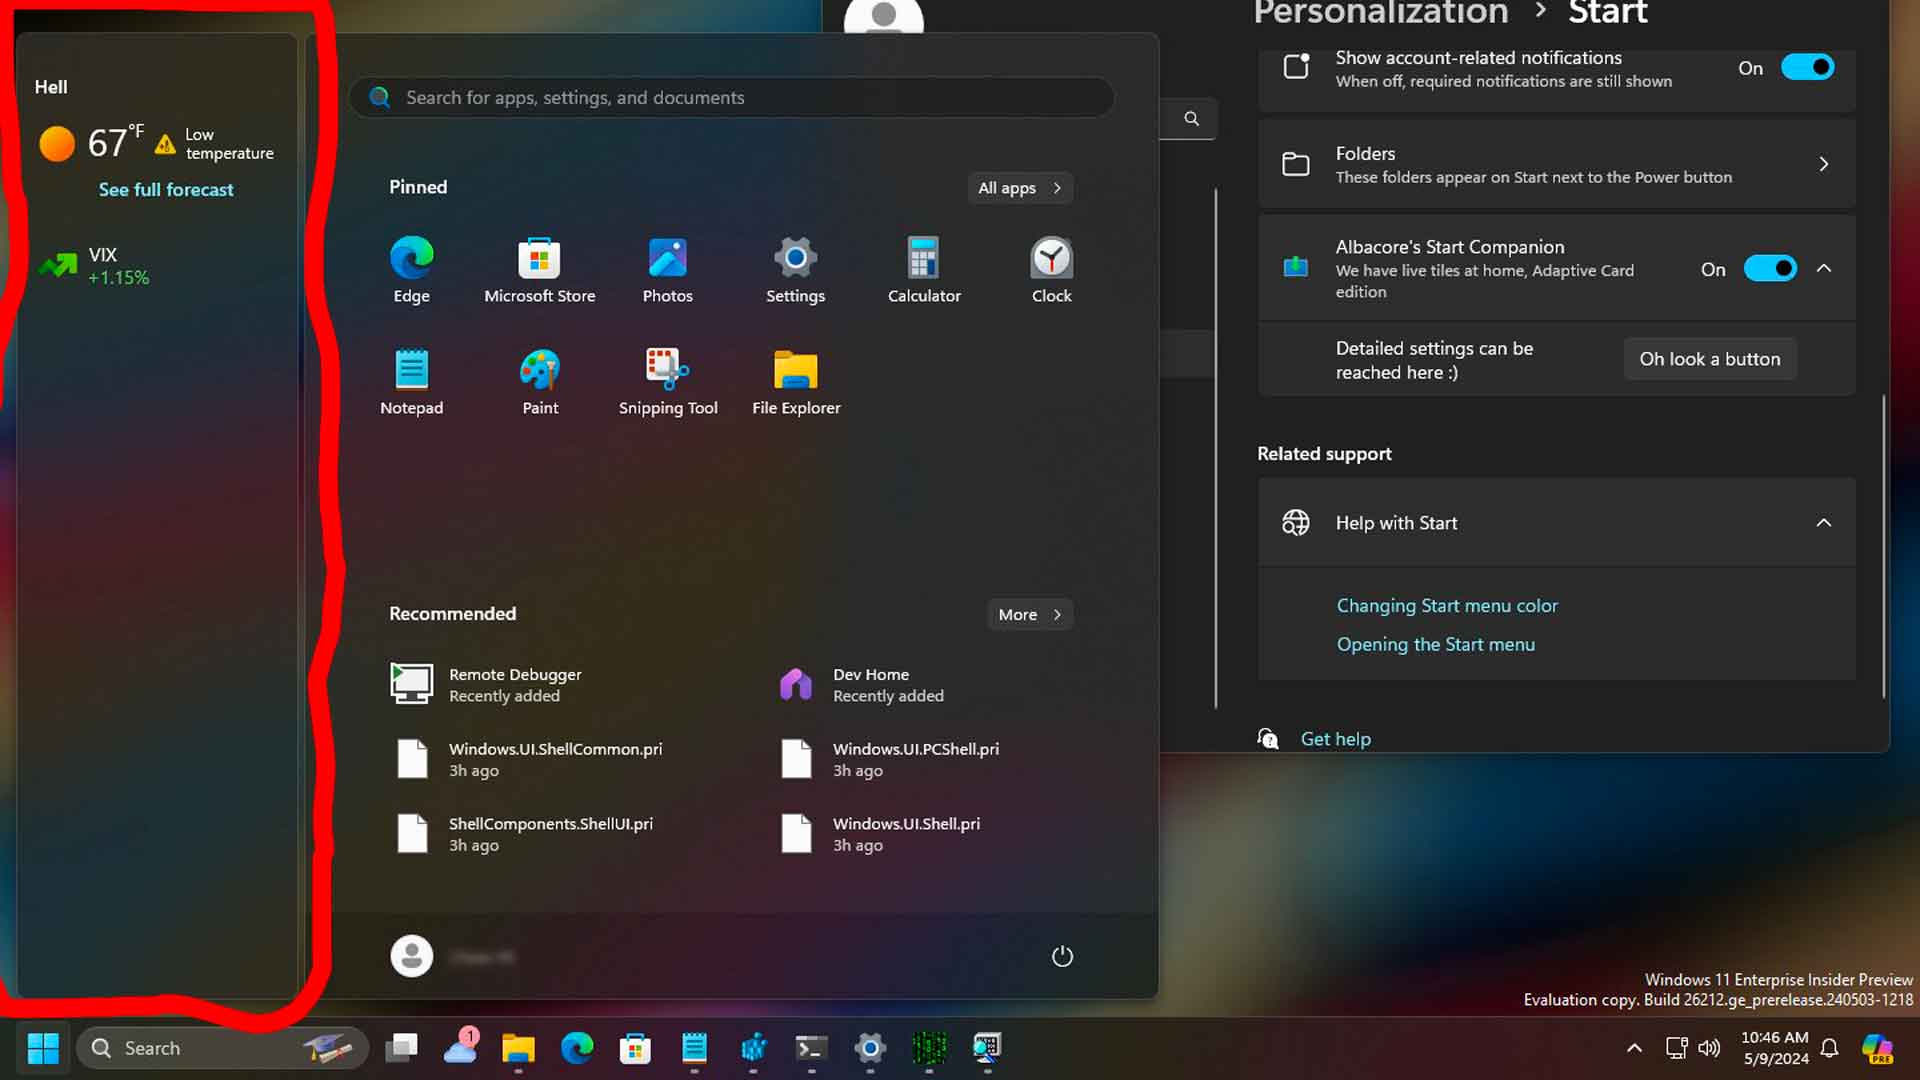 Windows 11, Microsoft is working on a major update to the Start menu